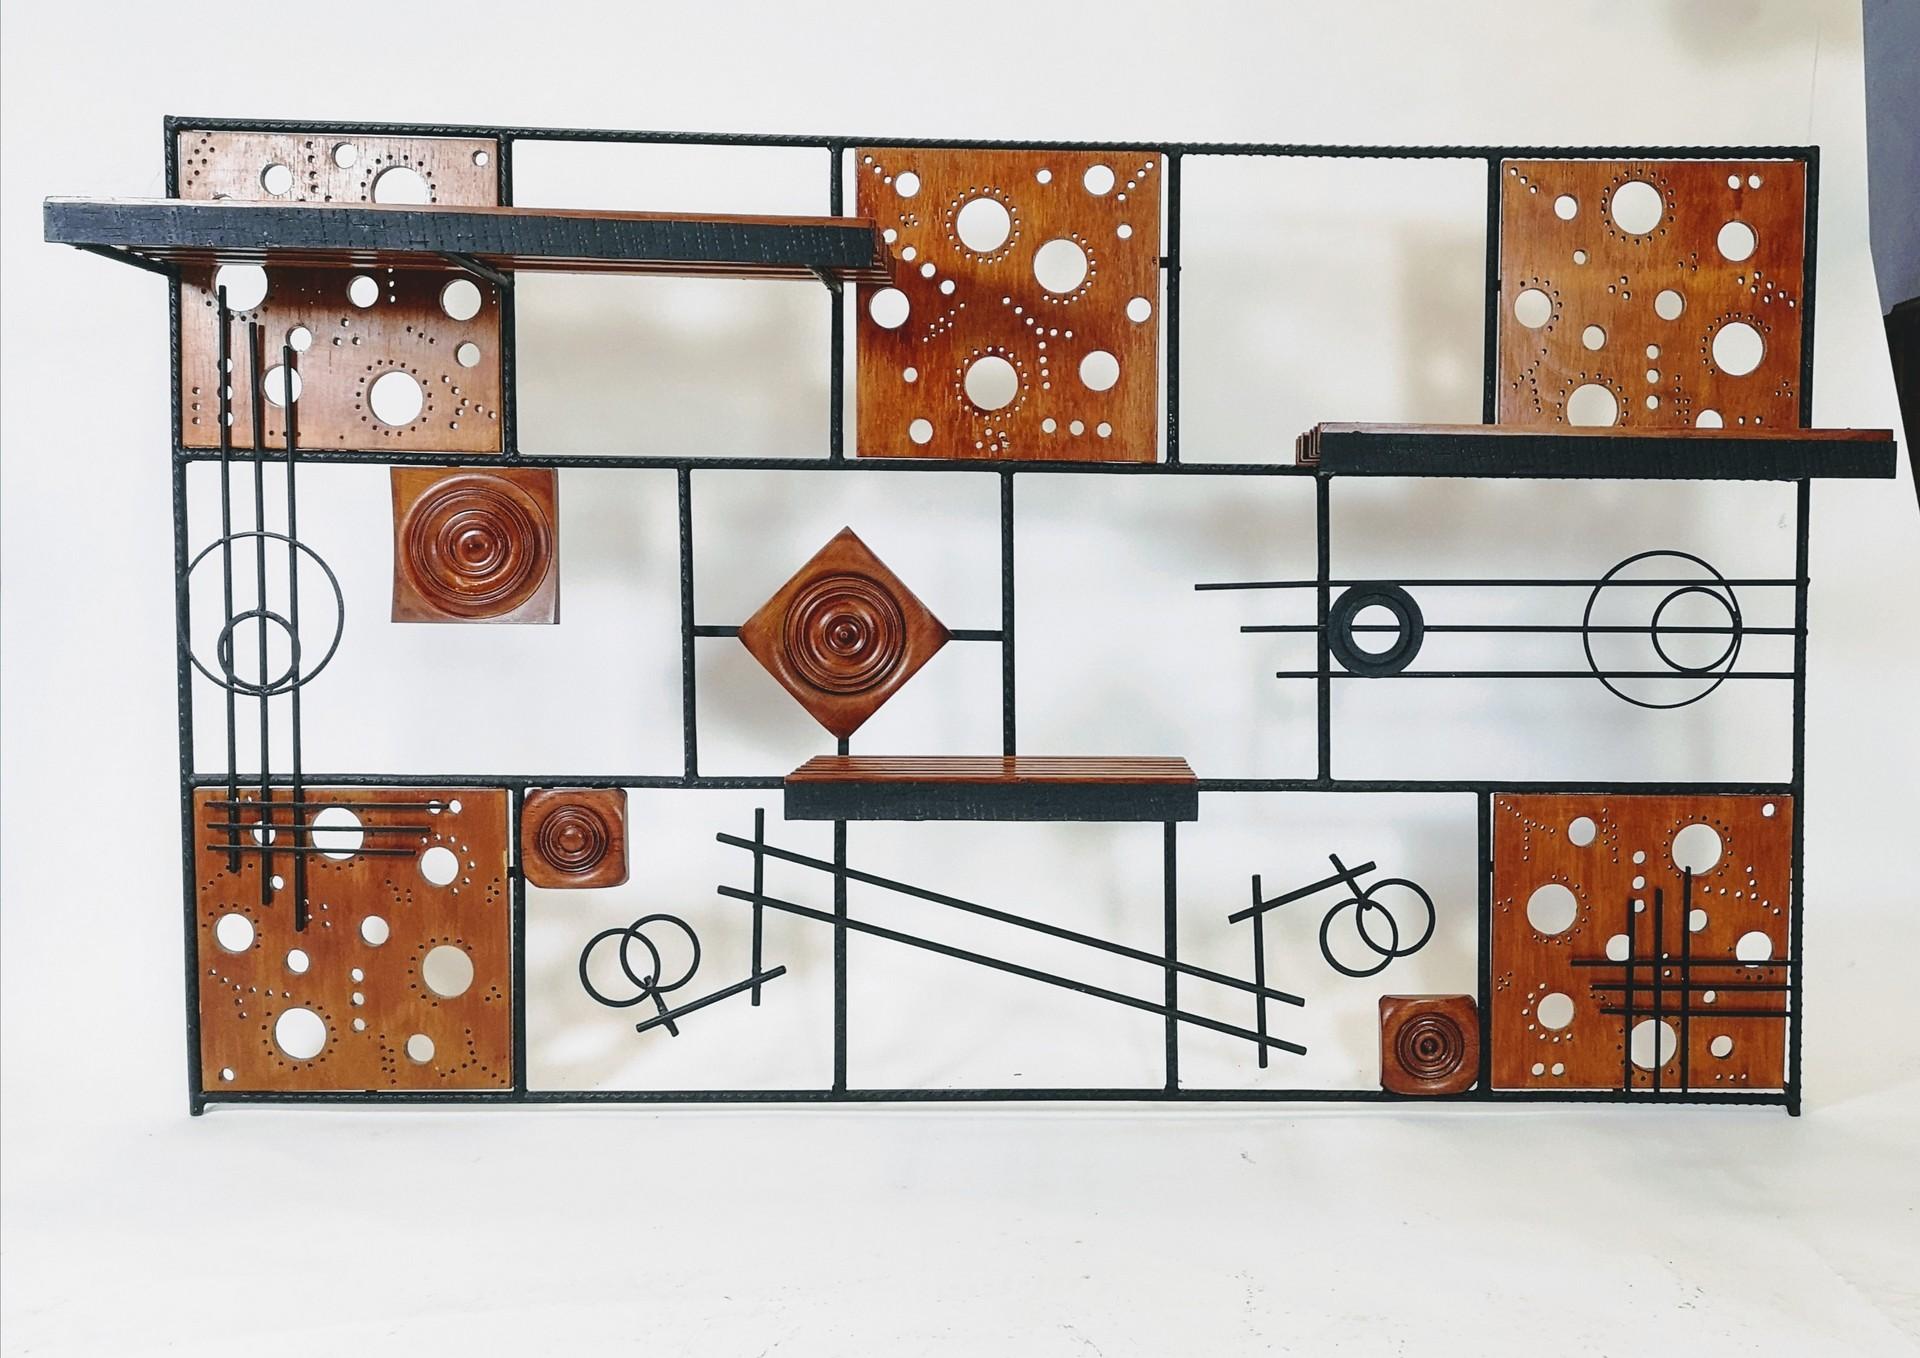 Large Rebar and wood wall shelf, with op-art and retro motifs. Made of veneered wood and hand hammered iron plus rebar this large format shelf is a rare piece from the 1970s.